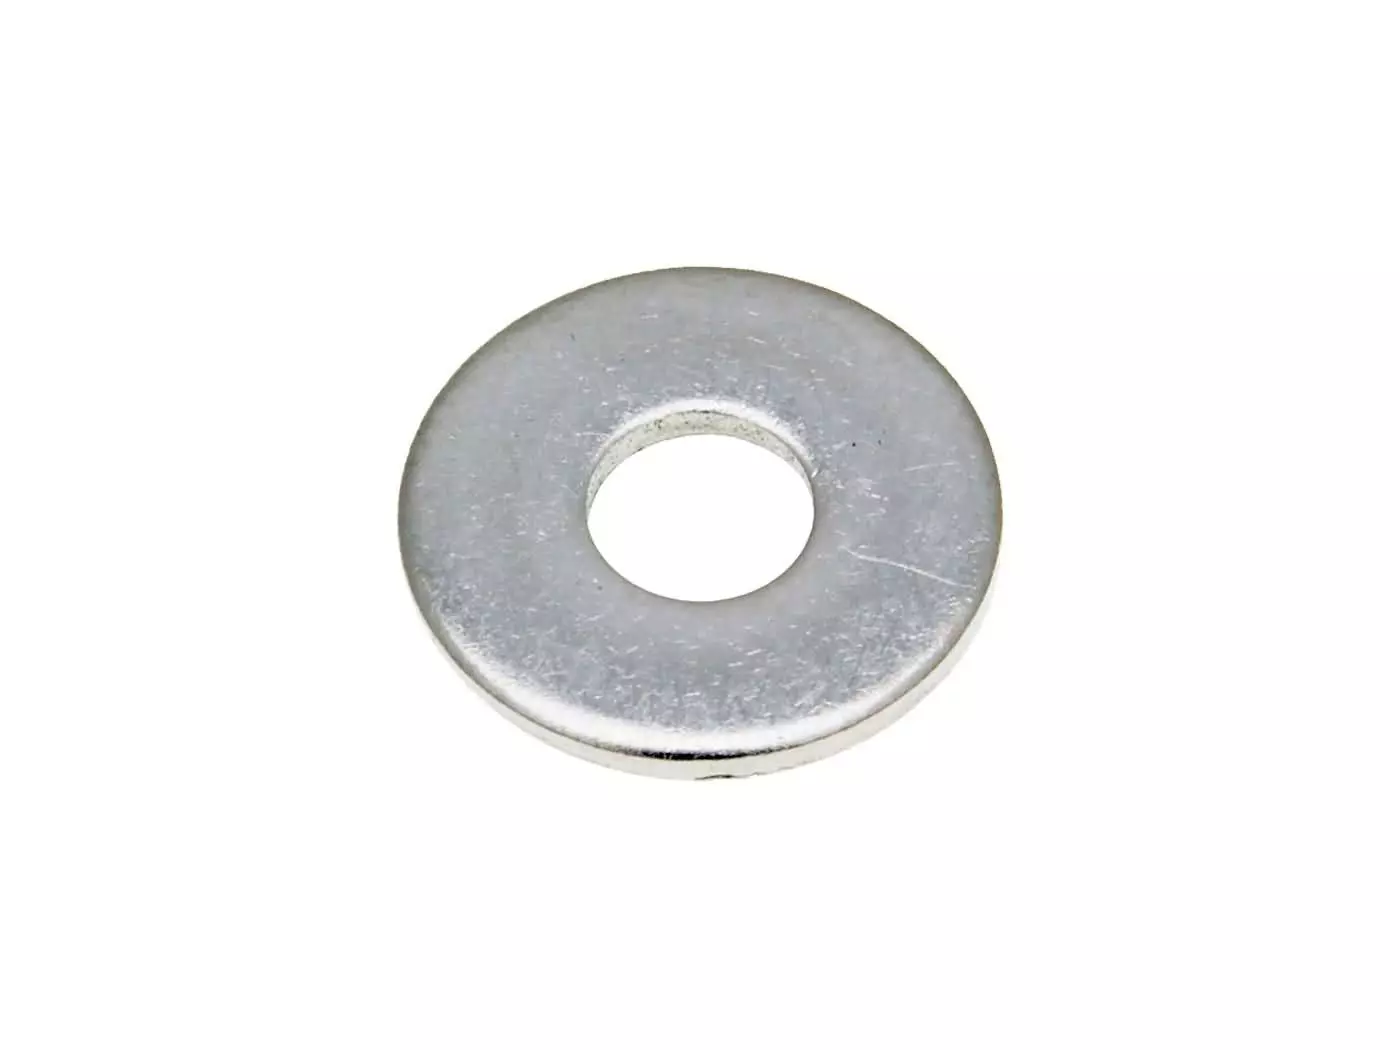 Large Diameter Washers DIN9021 5.3x15x1.2 M5 Stainless Steel A2 (100 Pcs)